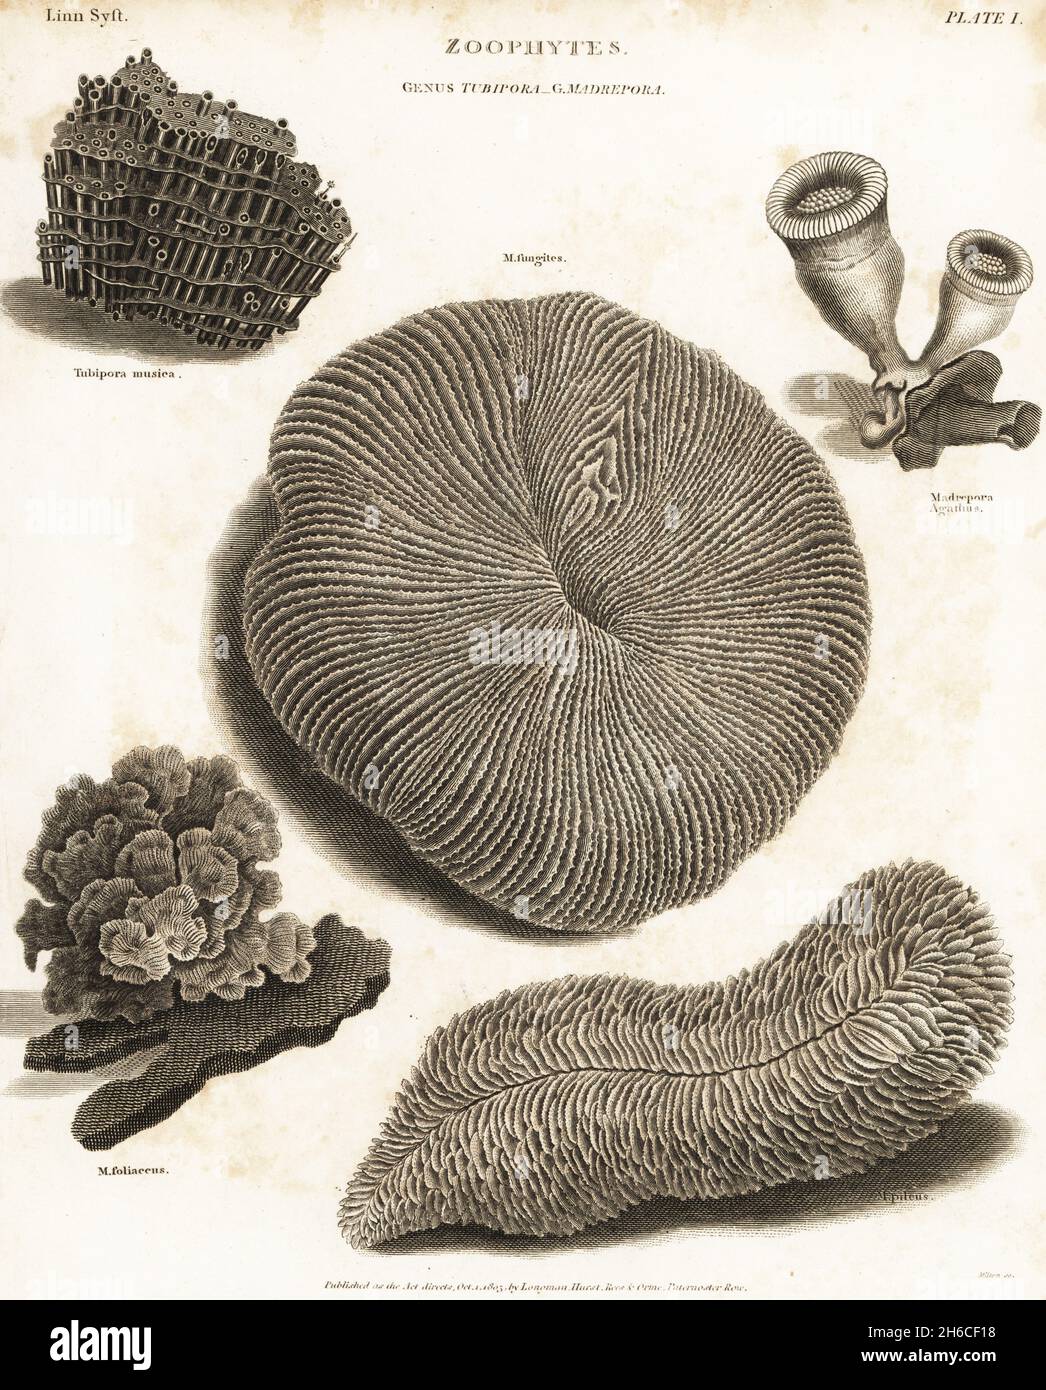 Organ pipe coral, Tubipora musica, mushroom coral, Fungia fungites, bowl coral, Halomitra pileus, Madrepora foliaceus and Madrepora agathus. Copperplate engraving by Milton from Abraham Rees' Cyclopedia or Universal Dictionary of Arts, Sciences and Literature, Longman, Hurst, Rees and Orme, London, 1803. Stock Photo